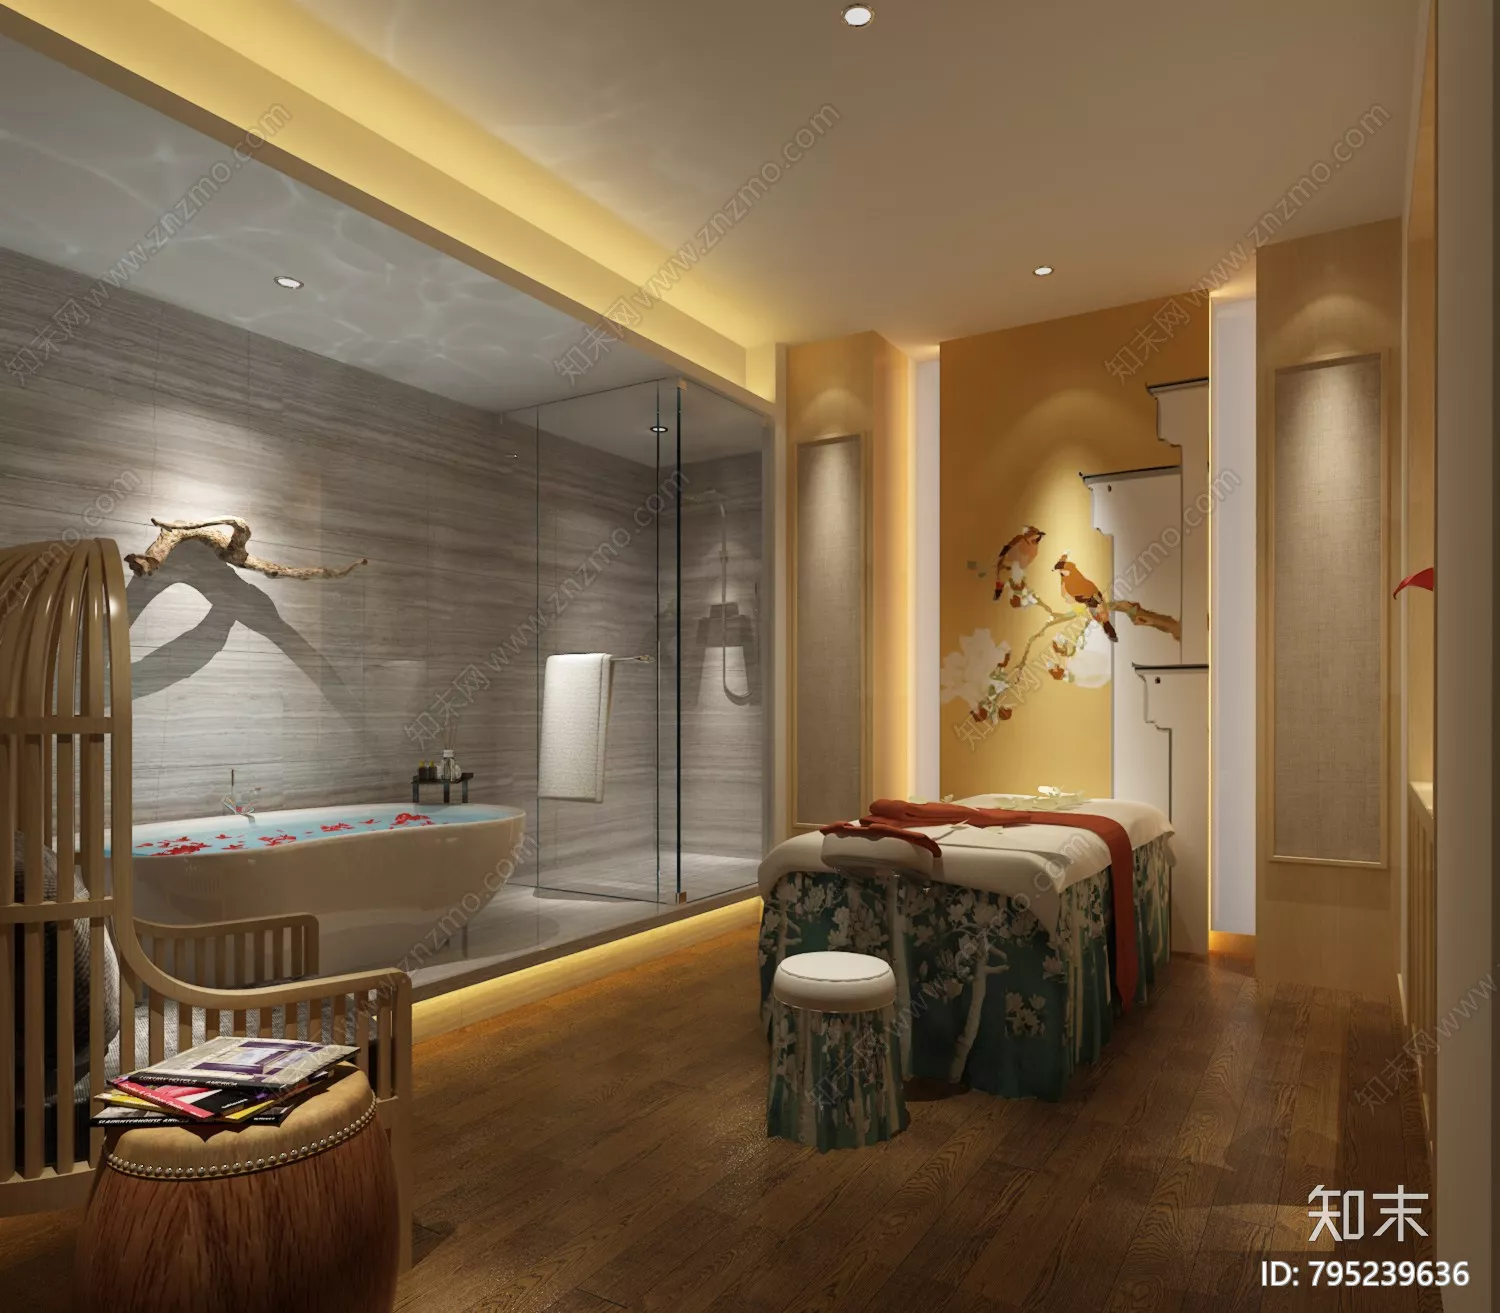 MODERN SPA AND BEAUTY - SKETCHUP 3D SCENE - VRAY OR ENSCAPE - ID14041